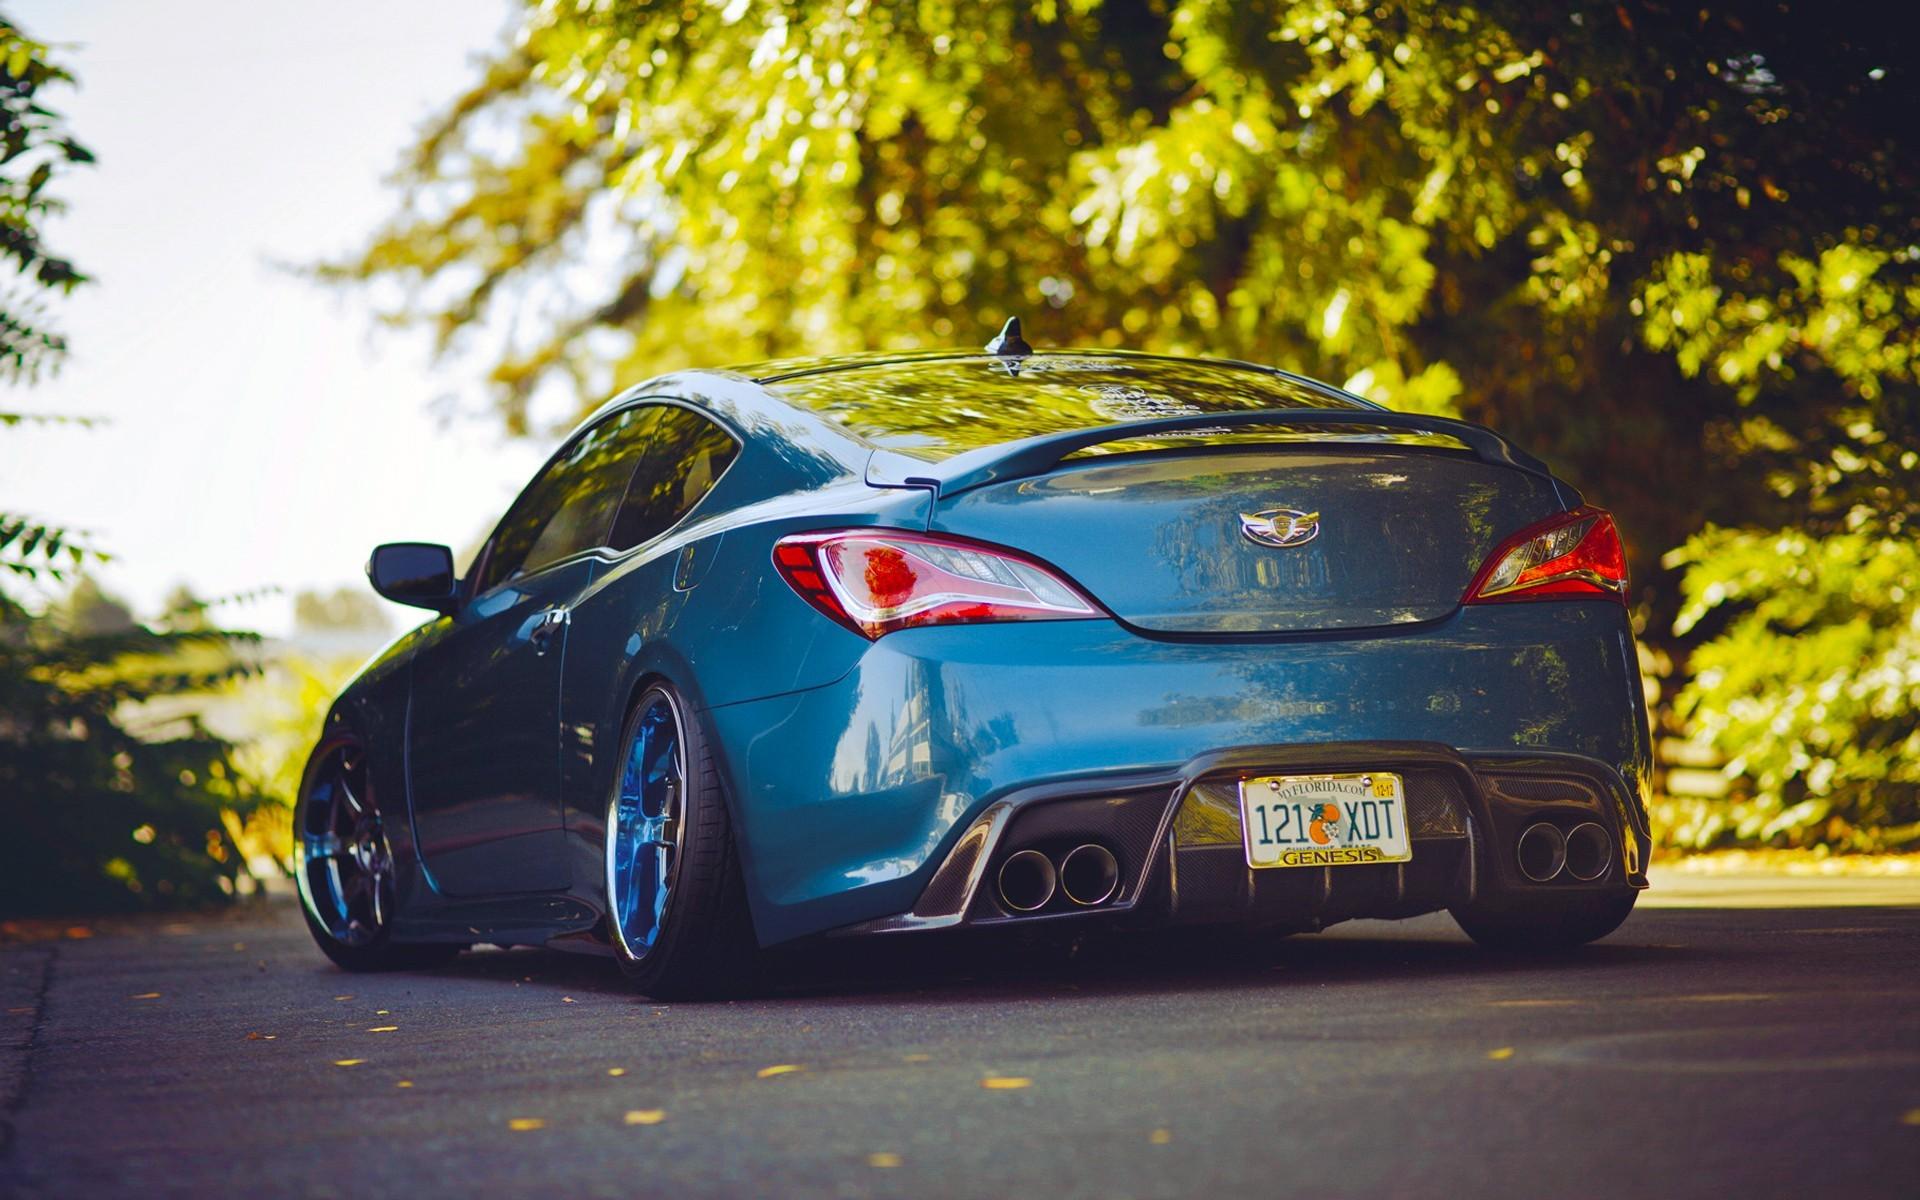 Cars tuning hyundai genesis coupe stance slammed camber wallpaper